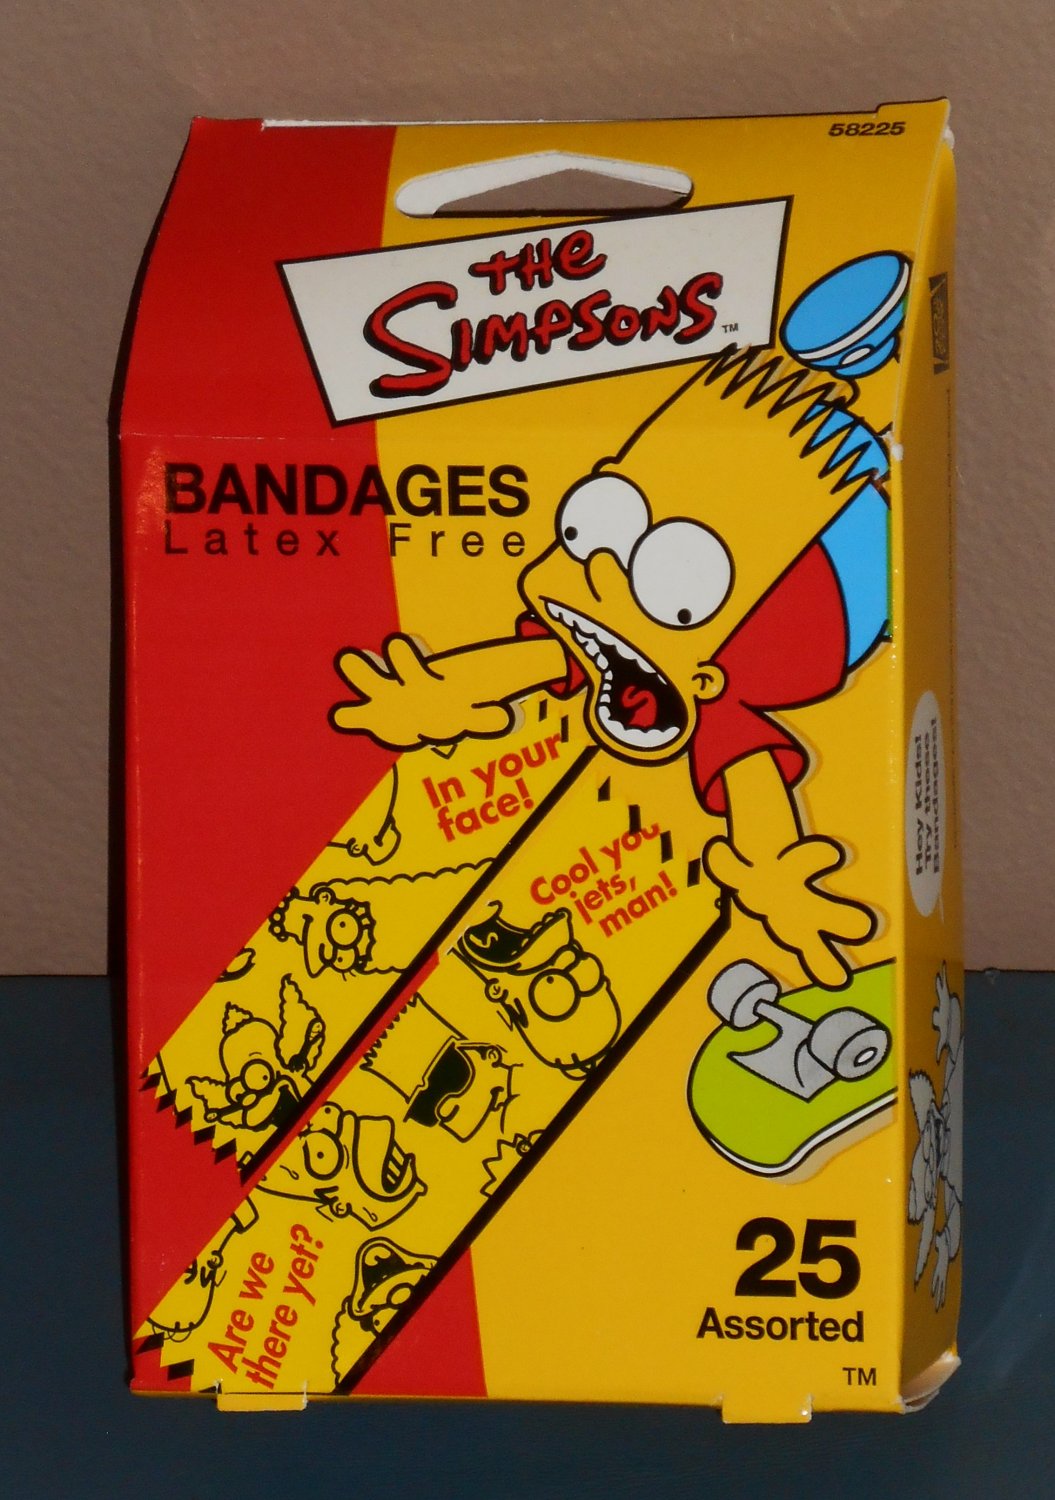 The Simpsons Latex Free Sterile Bandages 25 Assorted 2 Sizes Crackle Creations 58225 NIB 2001